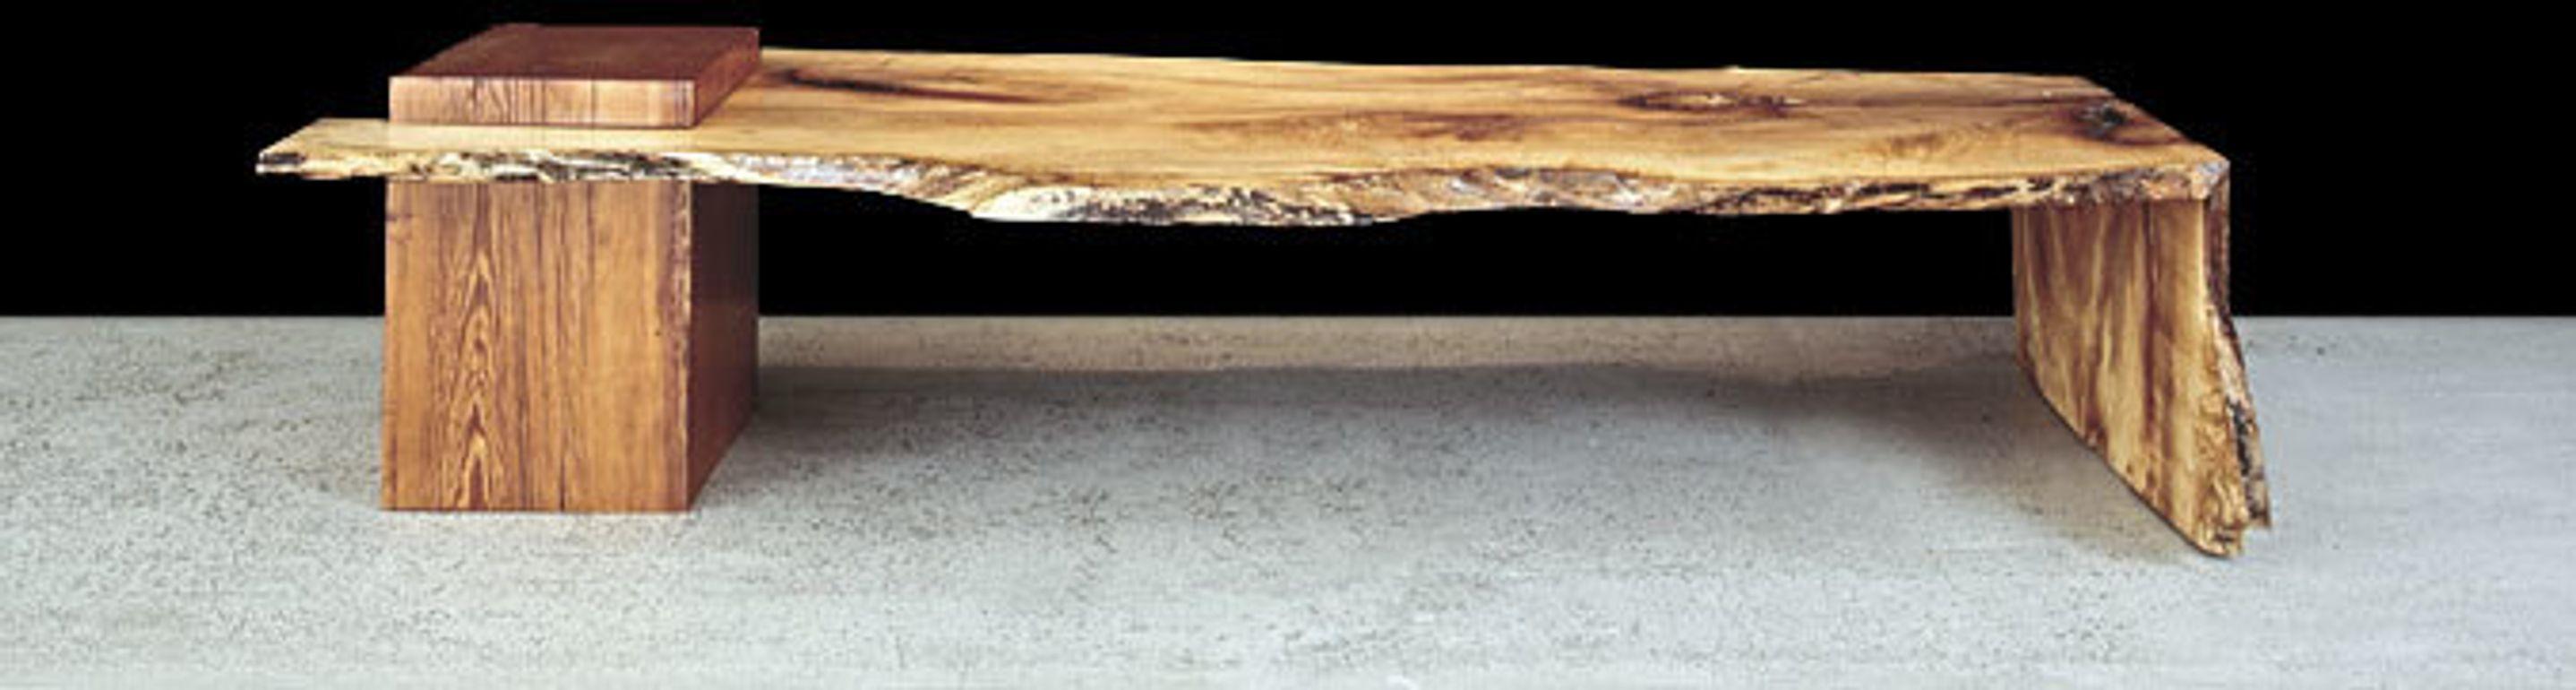 Organic Live Edge 1-Fold Maple Low Table / Bench with Heart Growth Pine Leg In New Condition For Sale In Hobart, NY